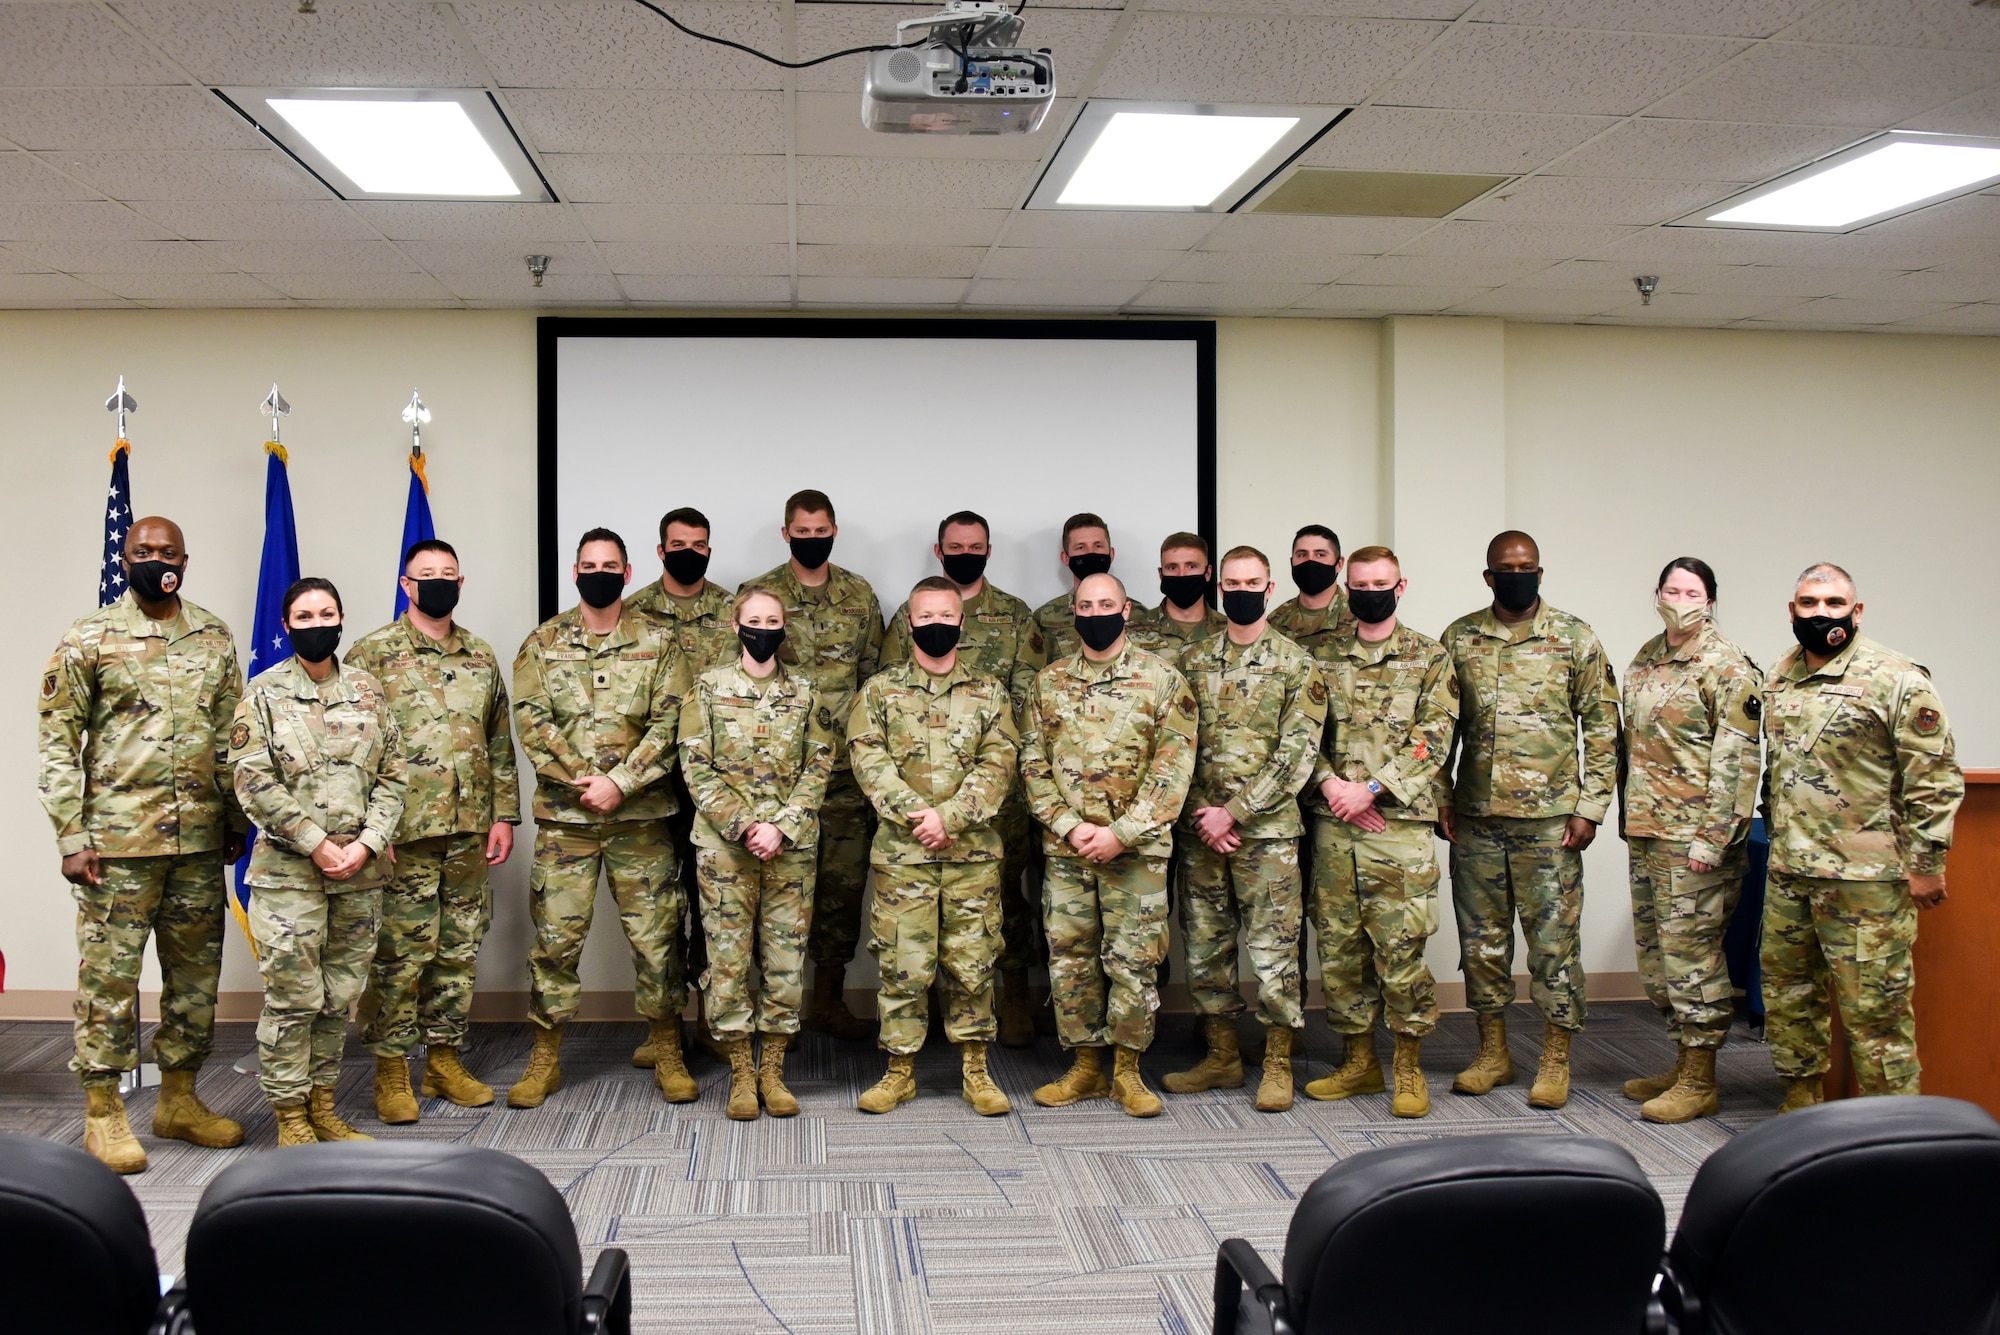 Wing, group and squadron level leadership pose for a photo with the newest graduates of the Aircraft Maintenance Officers Course at Sheppard Air Force Base, Texas, April 22, 2021